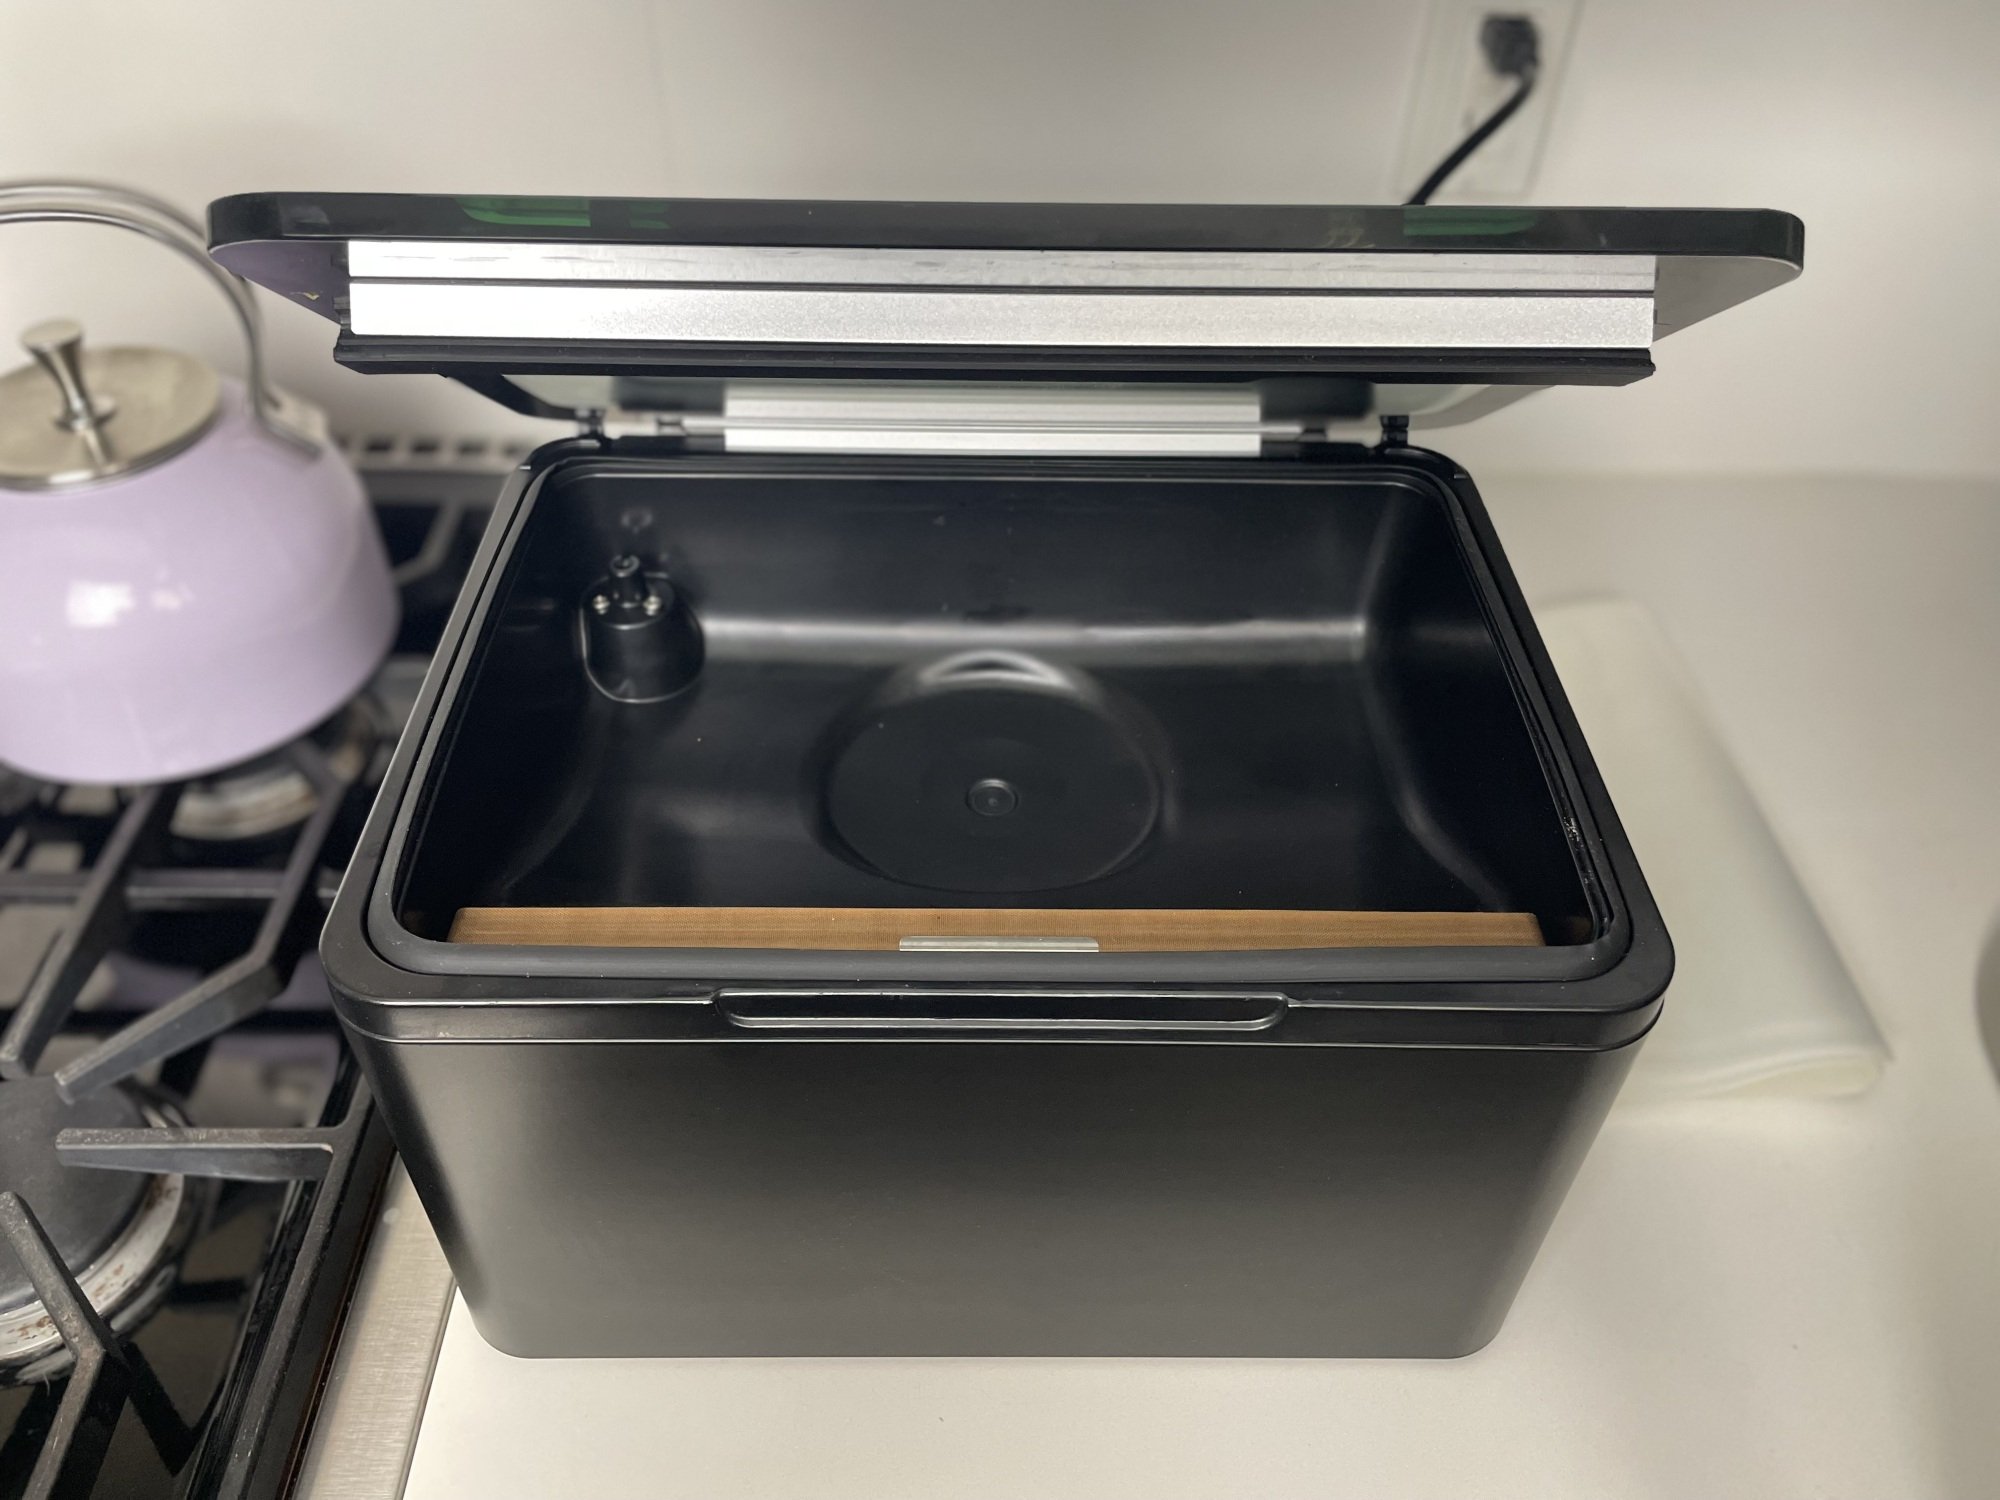 chamber vacuum sealer with open lid